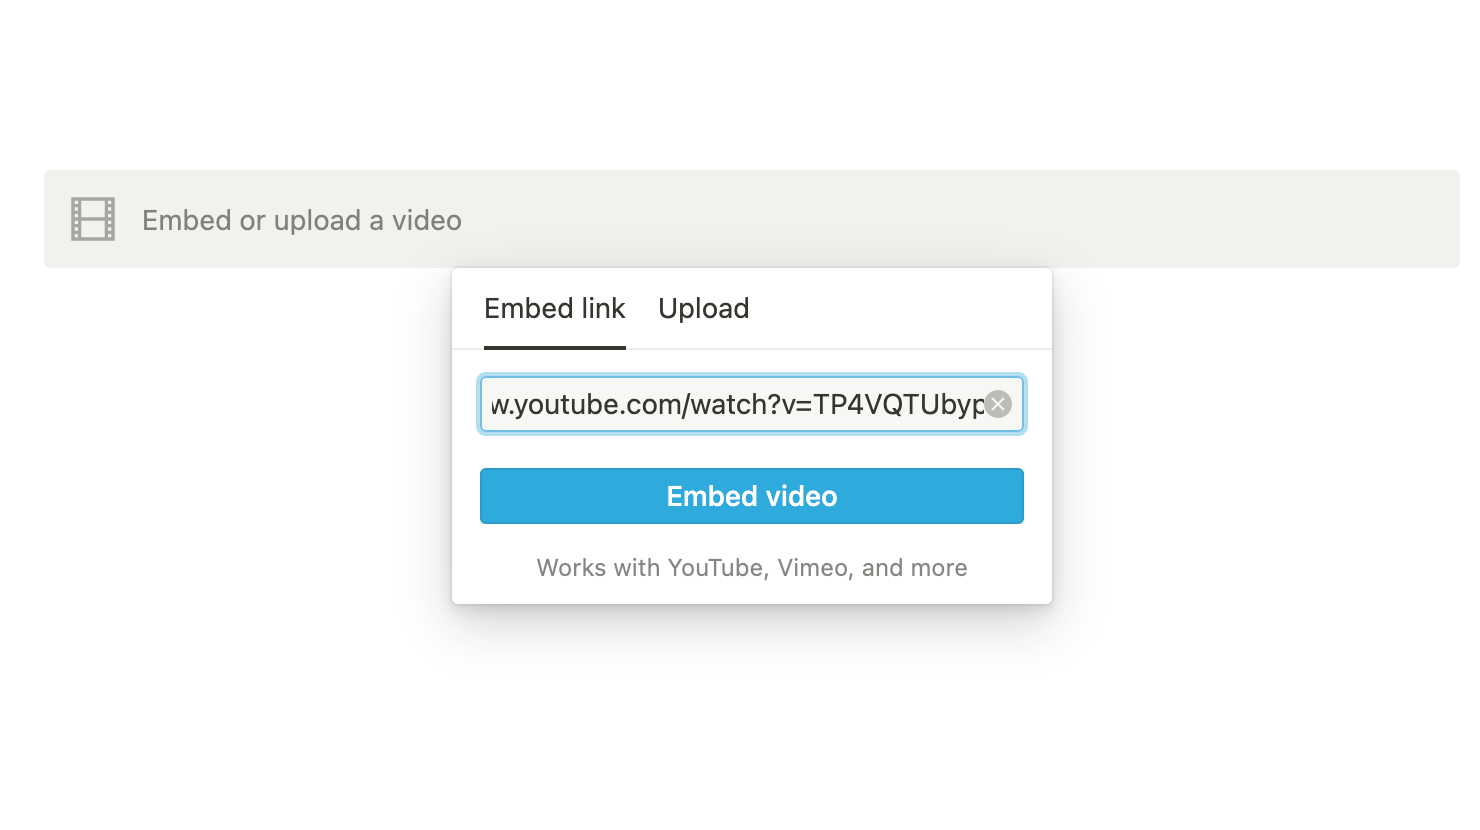 Selecting the embed video option